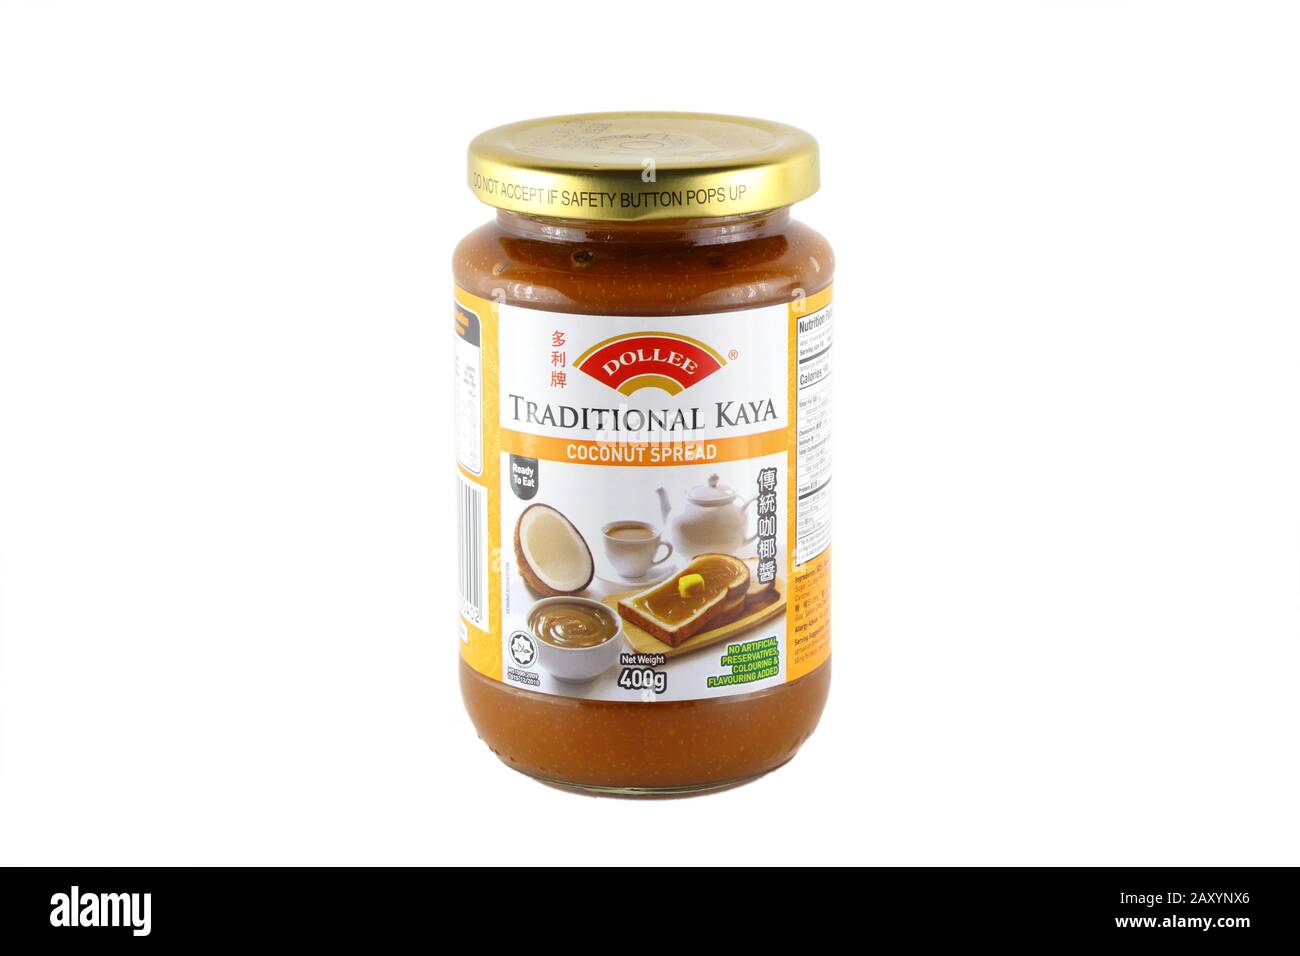 A jar of Dollee brand Traditional Kaya coconut jam isolated on a white background. cutout image for illustration and editorial use. Stock Photo